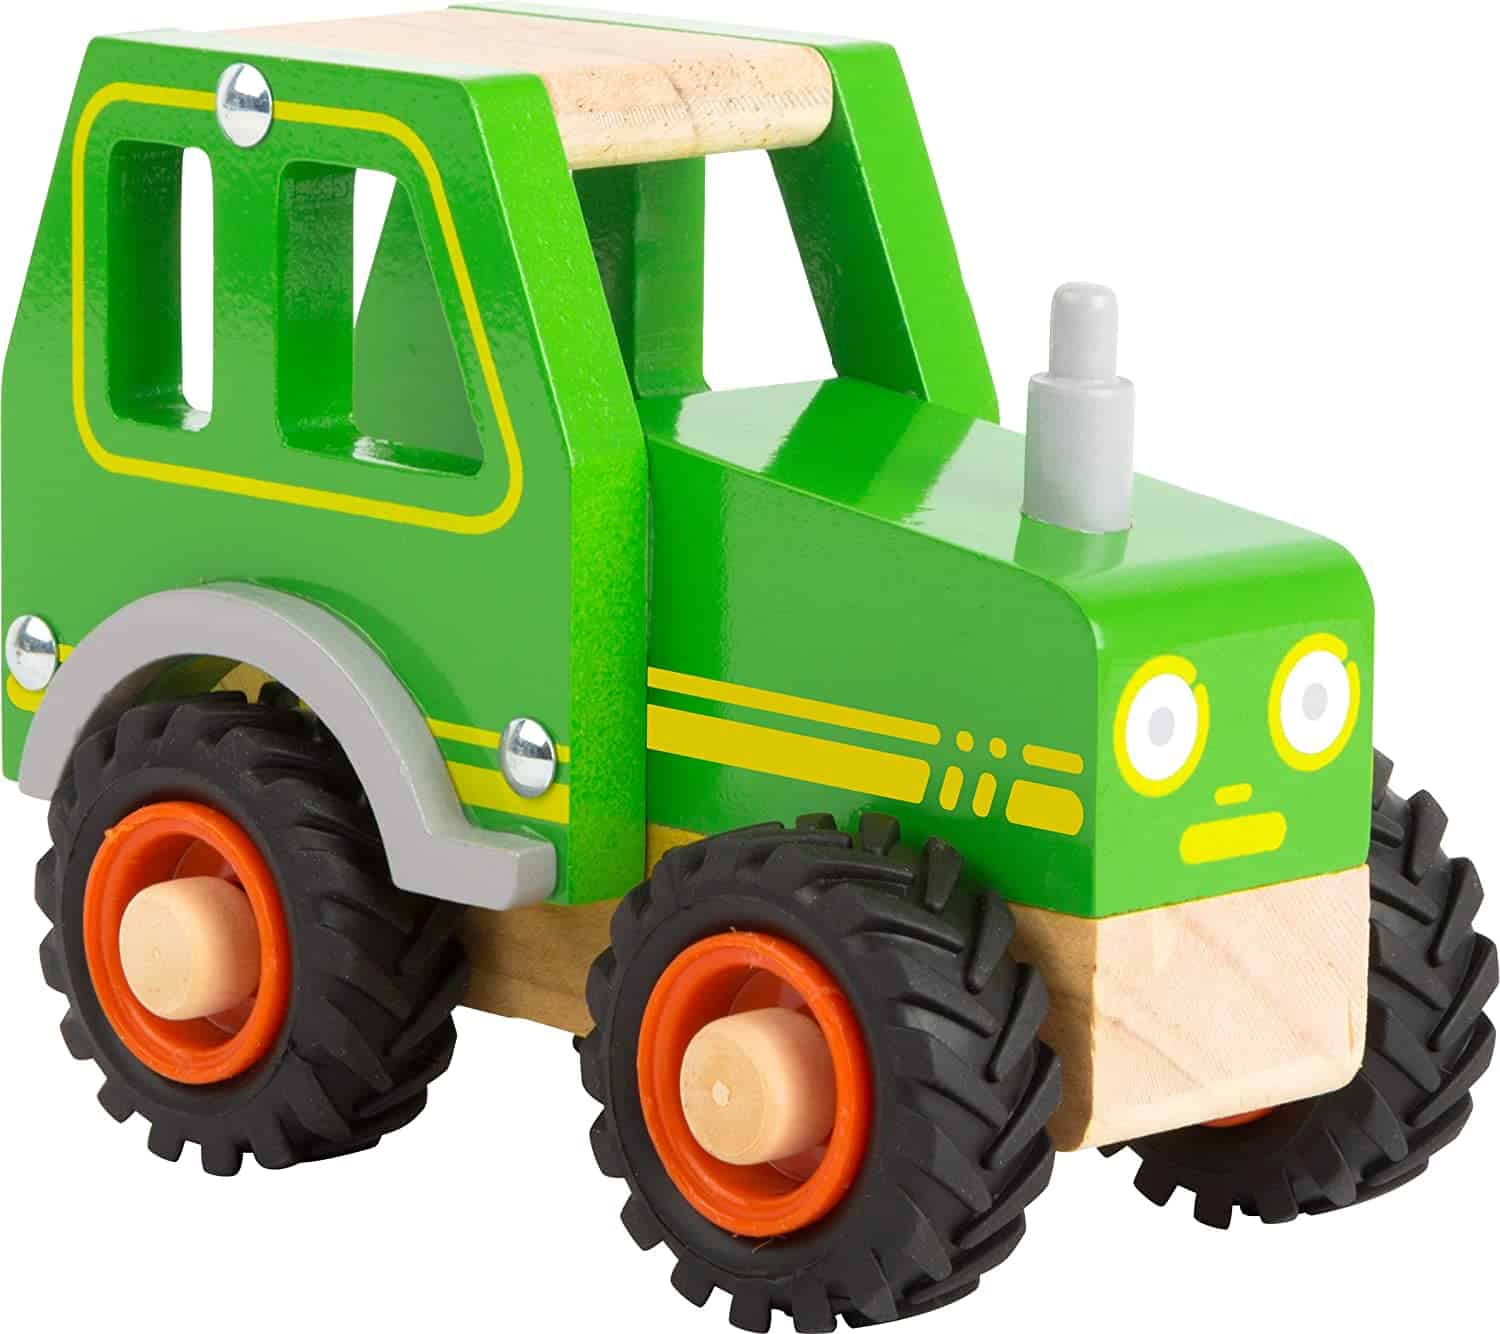 Best toy tractor made of wood: Small Foot Legler